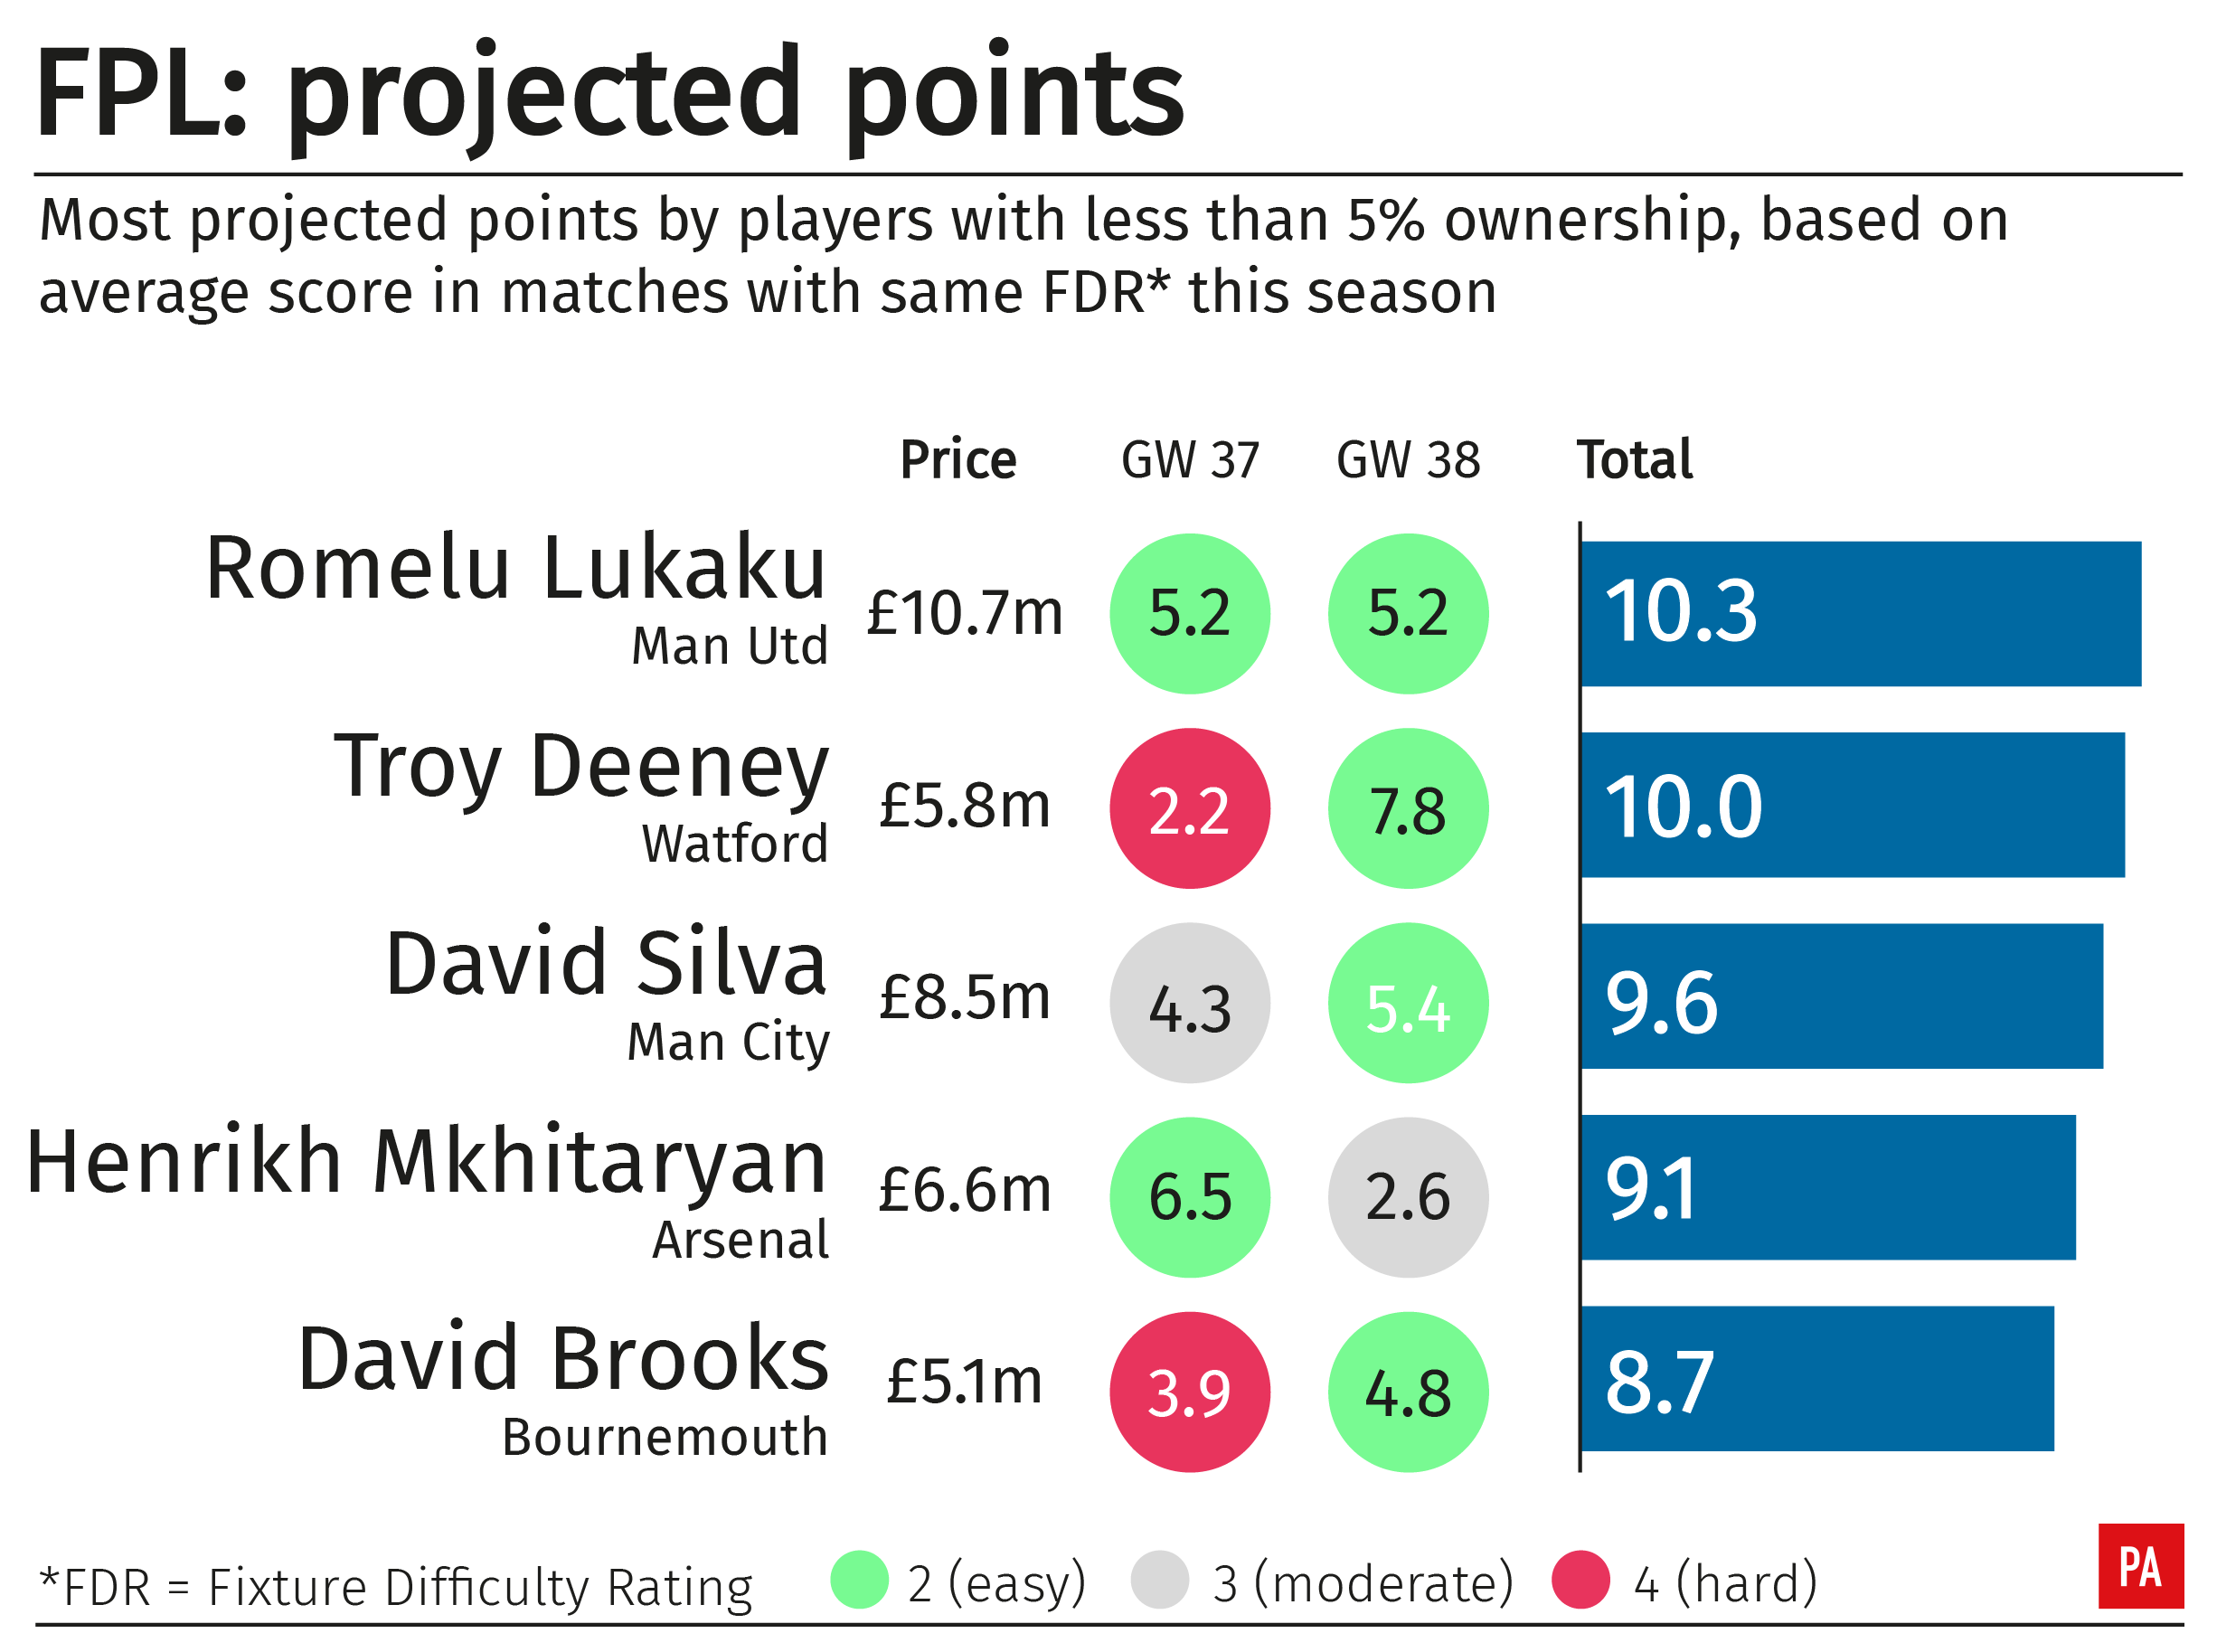 A graphic showing projected Fantasy Premier League points for footballers with less than 5% game ownership